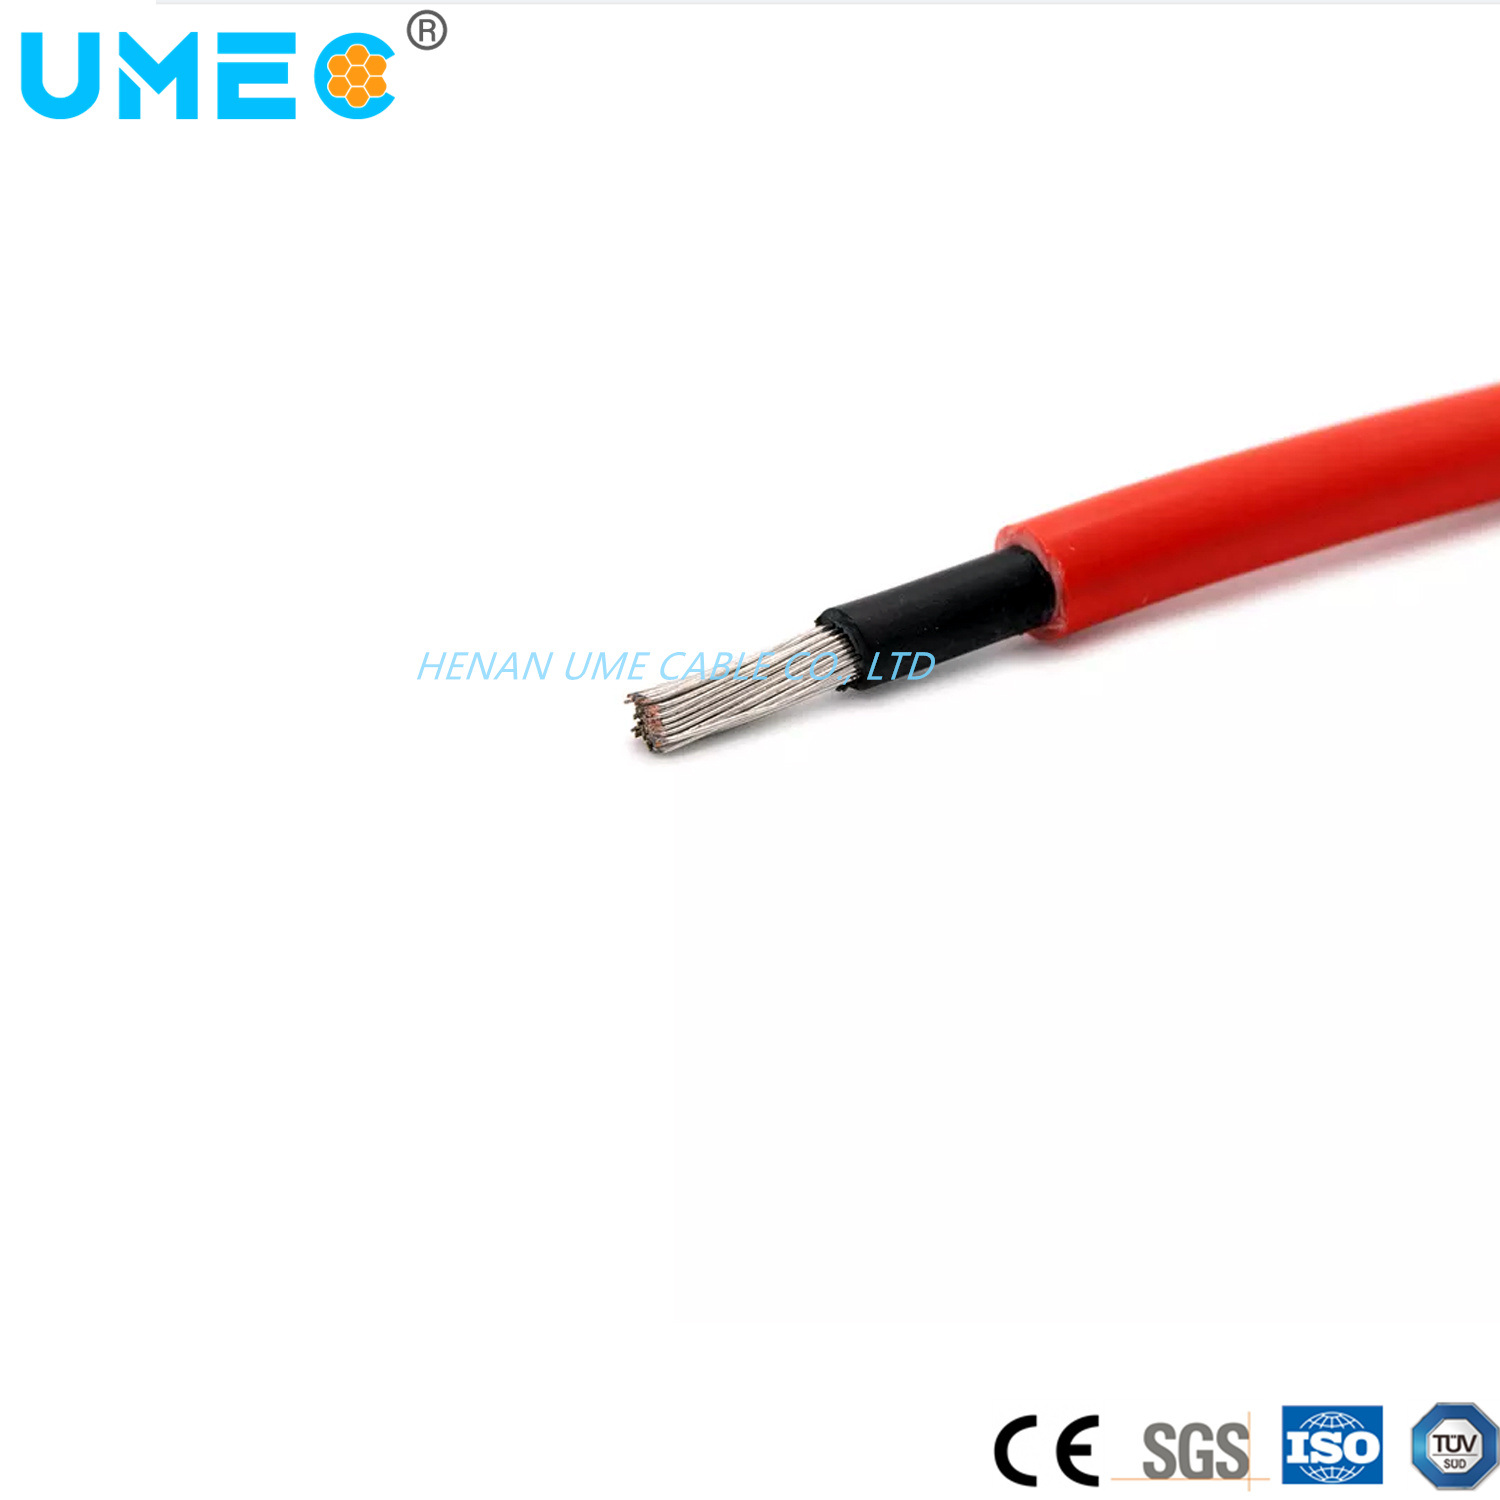 ISO CE SGS Certificated Photovoltaic Solar (PV) Cables Double Layer Protection Xlpo Insulated Jacket Round and Flat Cable 6mm2